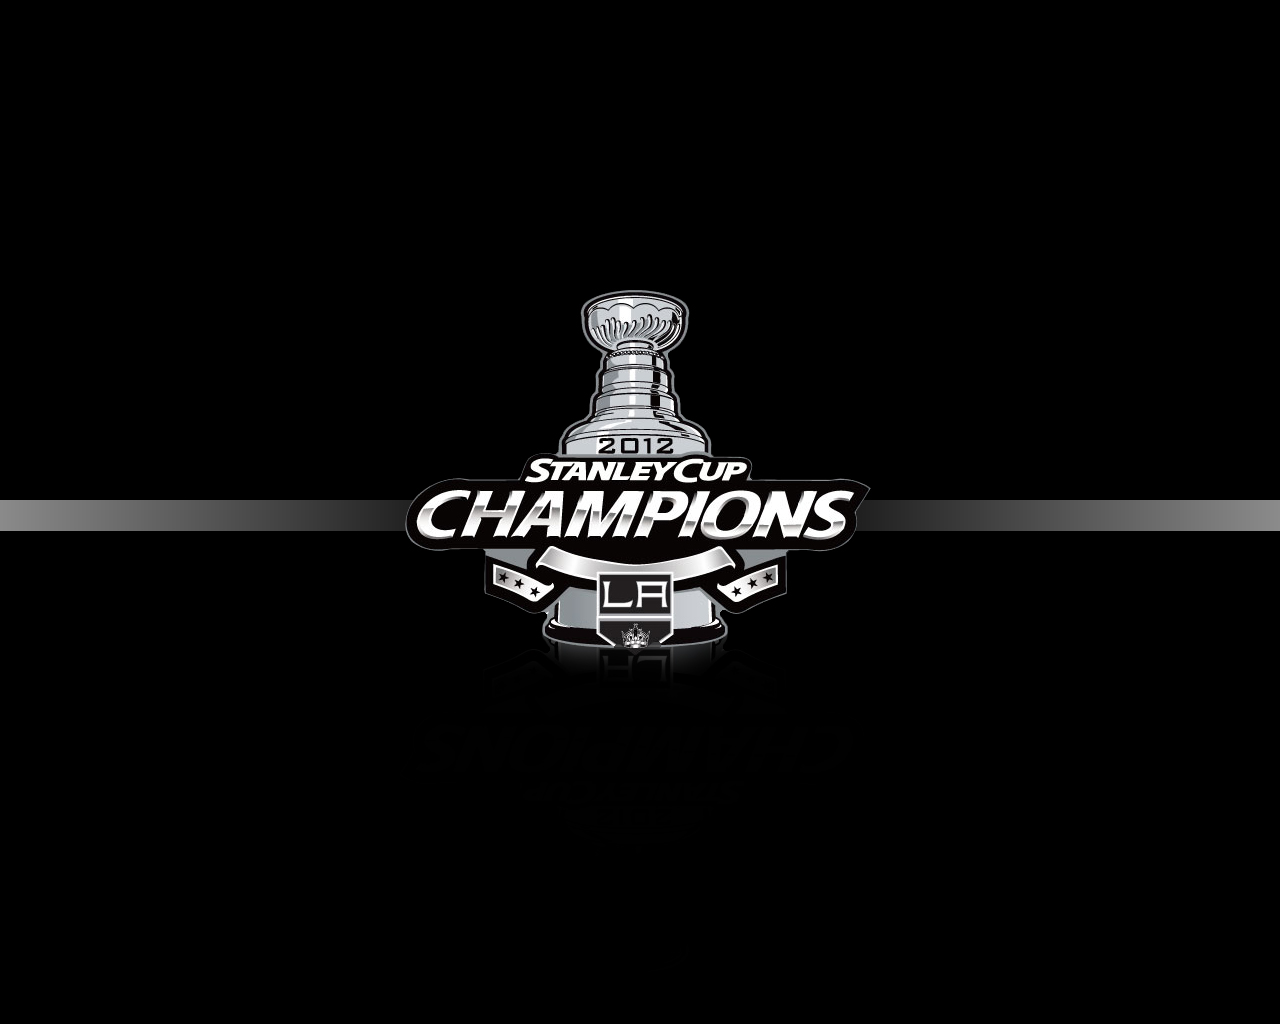 ... Wallpapers, Backgrounds & More: 2012 LA Kings Stanley Cup Champions